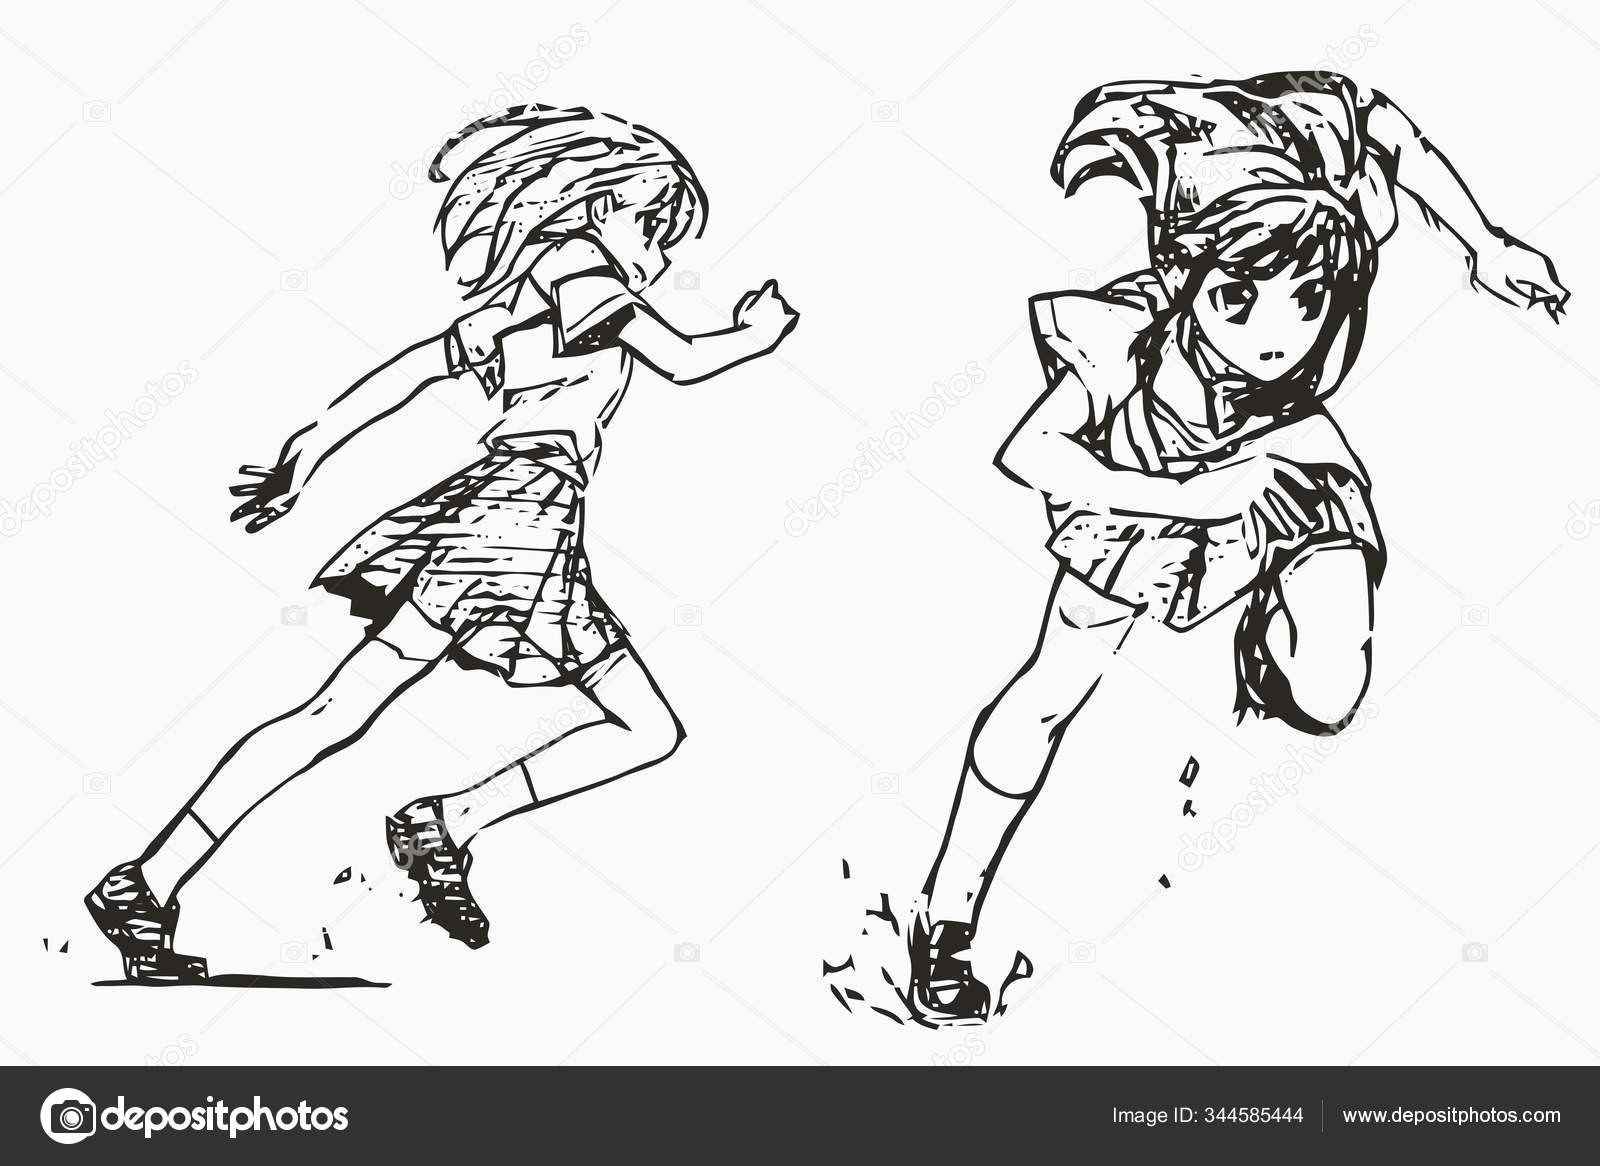 Action Poses 2 by shinsengumi77 on DeviantArt